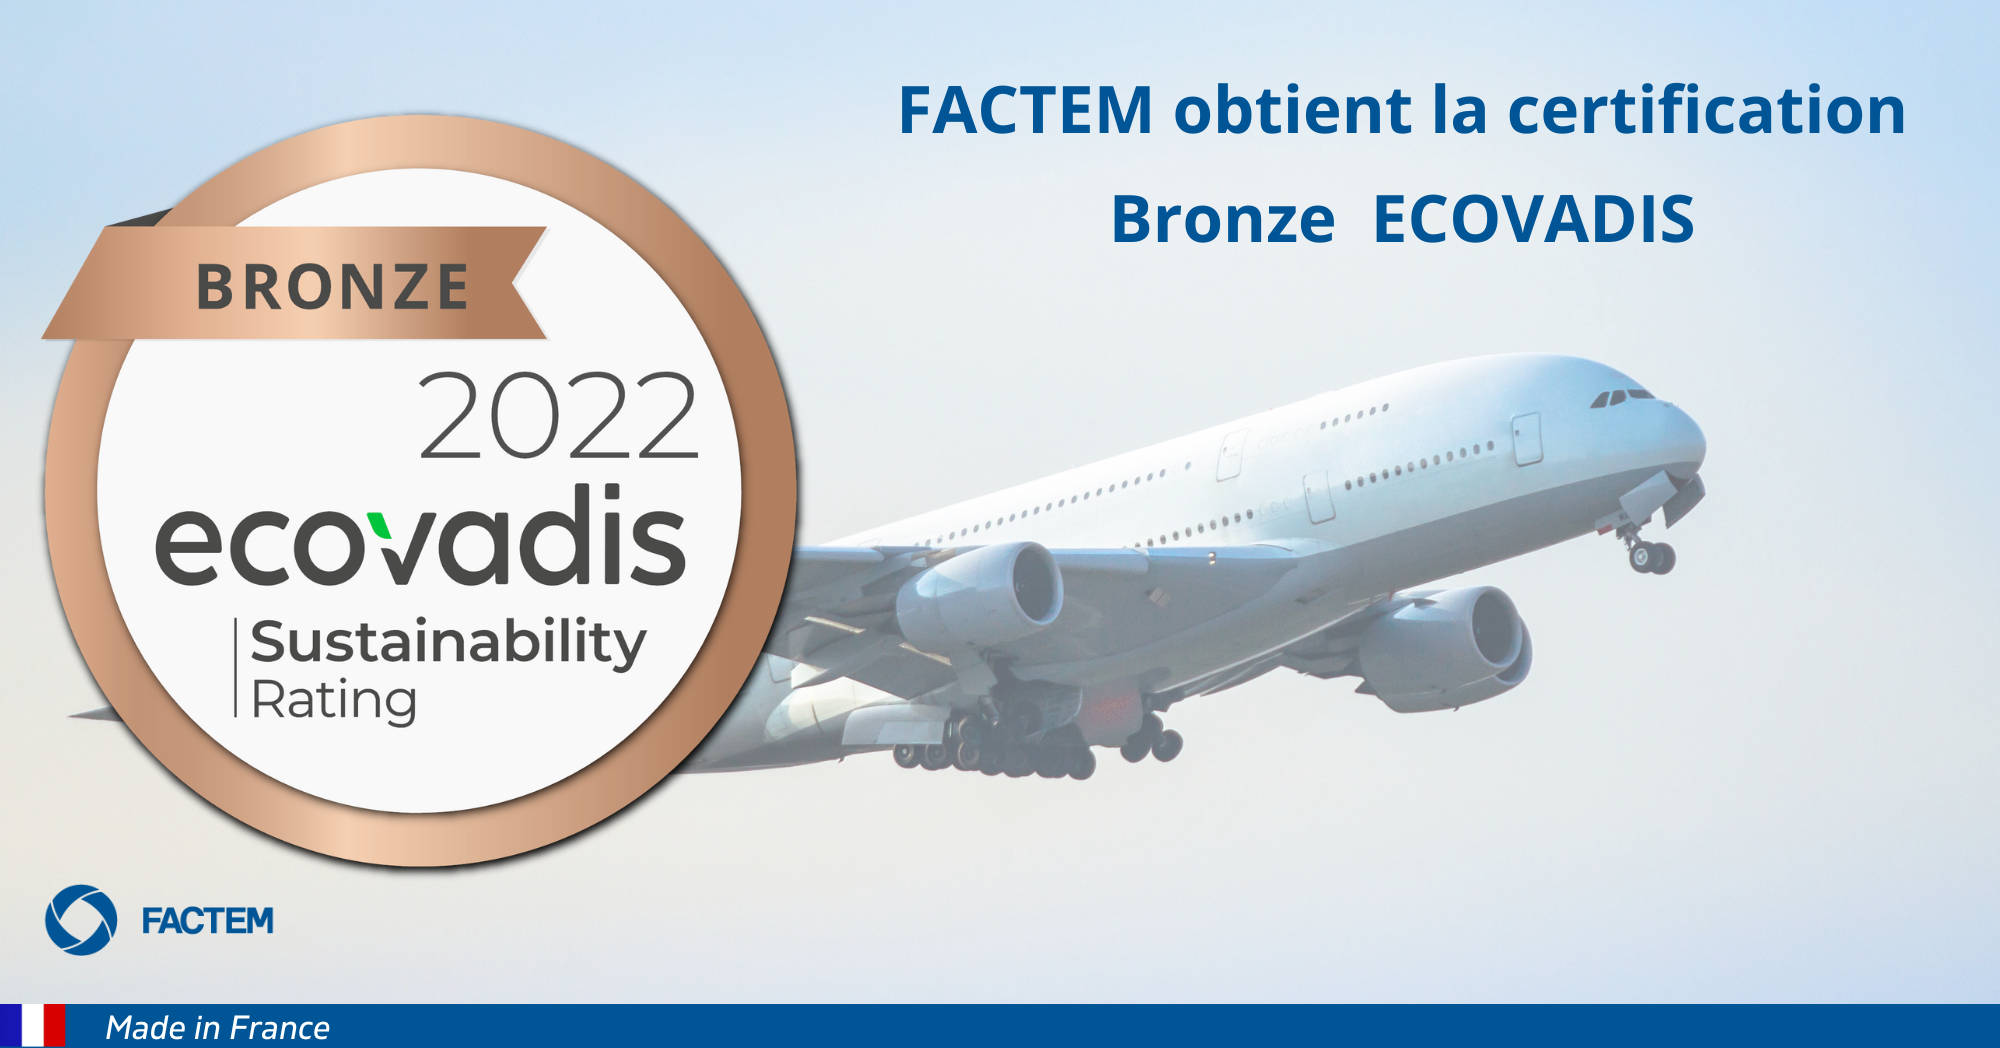 FACTEM obtains the bronze certification from Ecovadis.